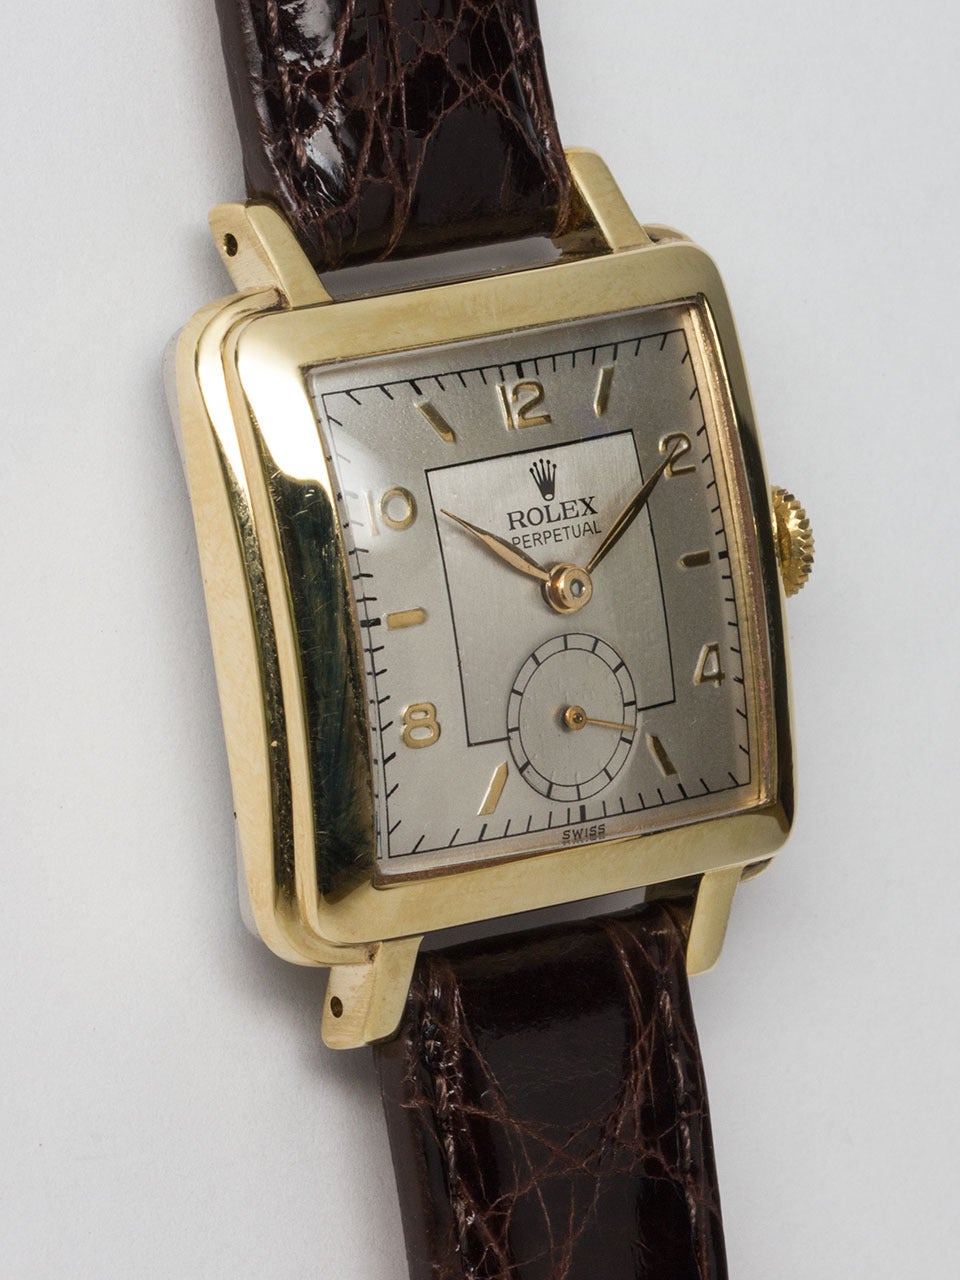 Rolex Yellow Gold and Stainless Steel Square Bubbleback circa 1950s. Largest of 3 sizes of this model produced, nicknamed “square bubbleback.” 31 x 39mm case with solid gold top and stainless steel back. Nicely restored 2 tone satin dial, gold